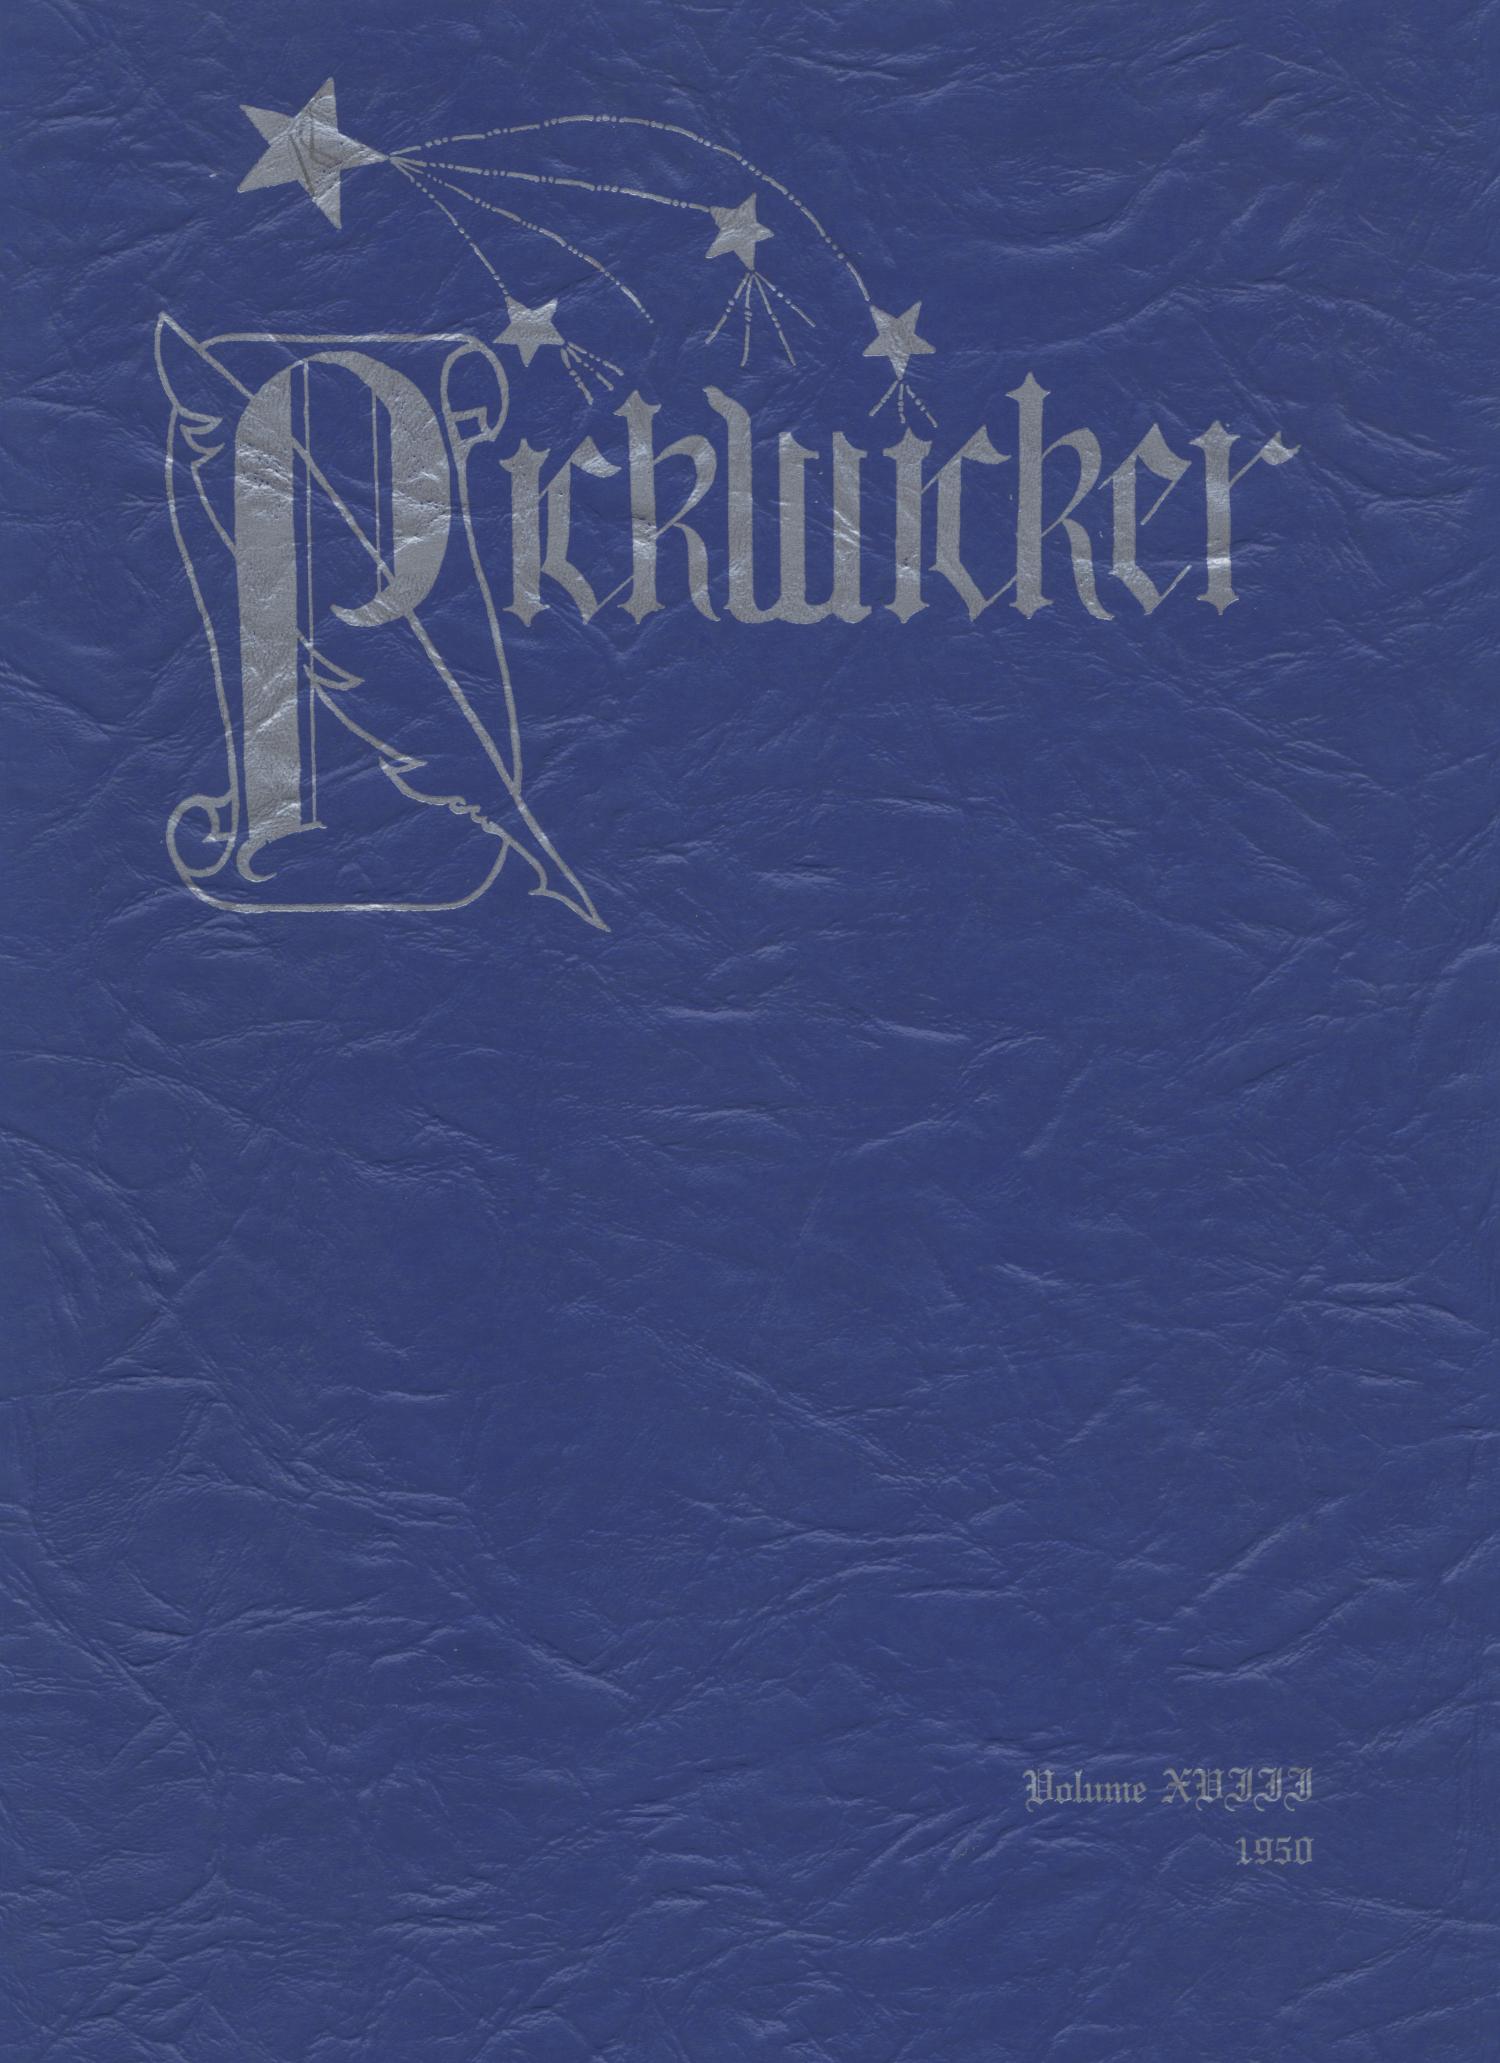 The Pickwicker, Volume 18, 1950
                                                
                                                    Front Cover
                                                